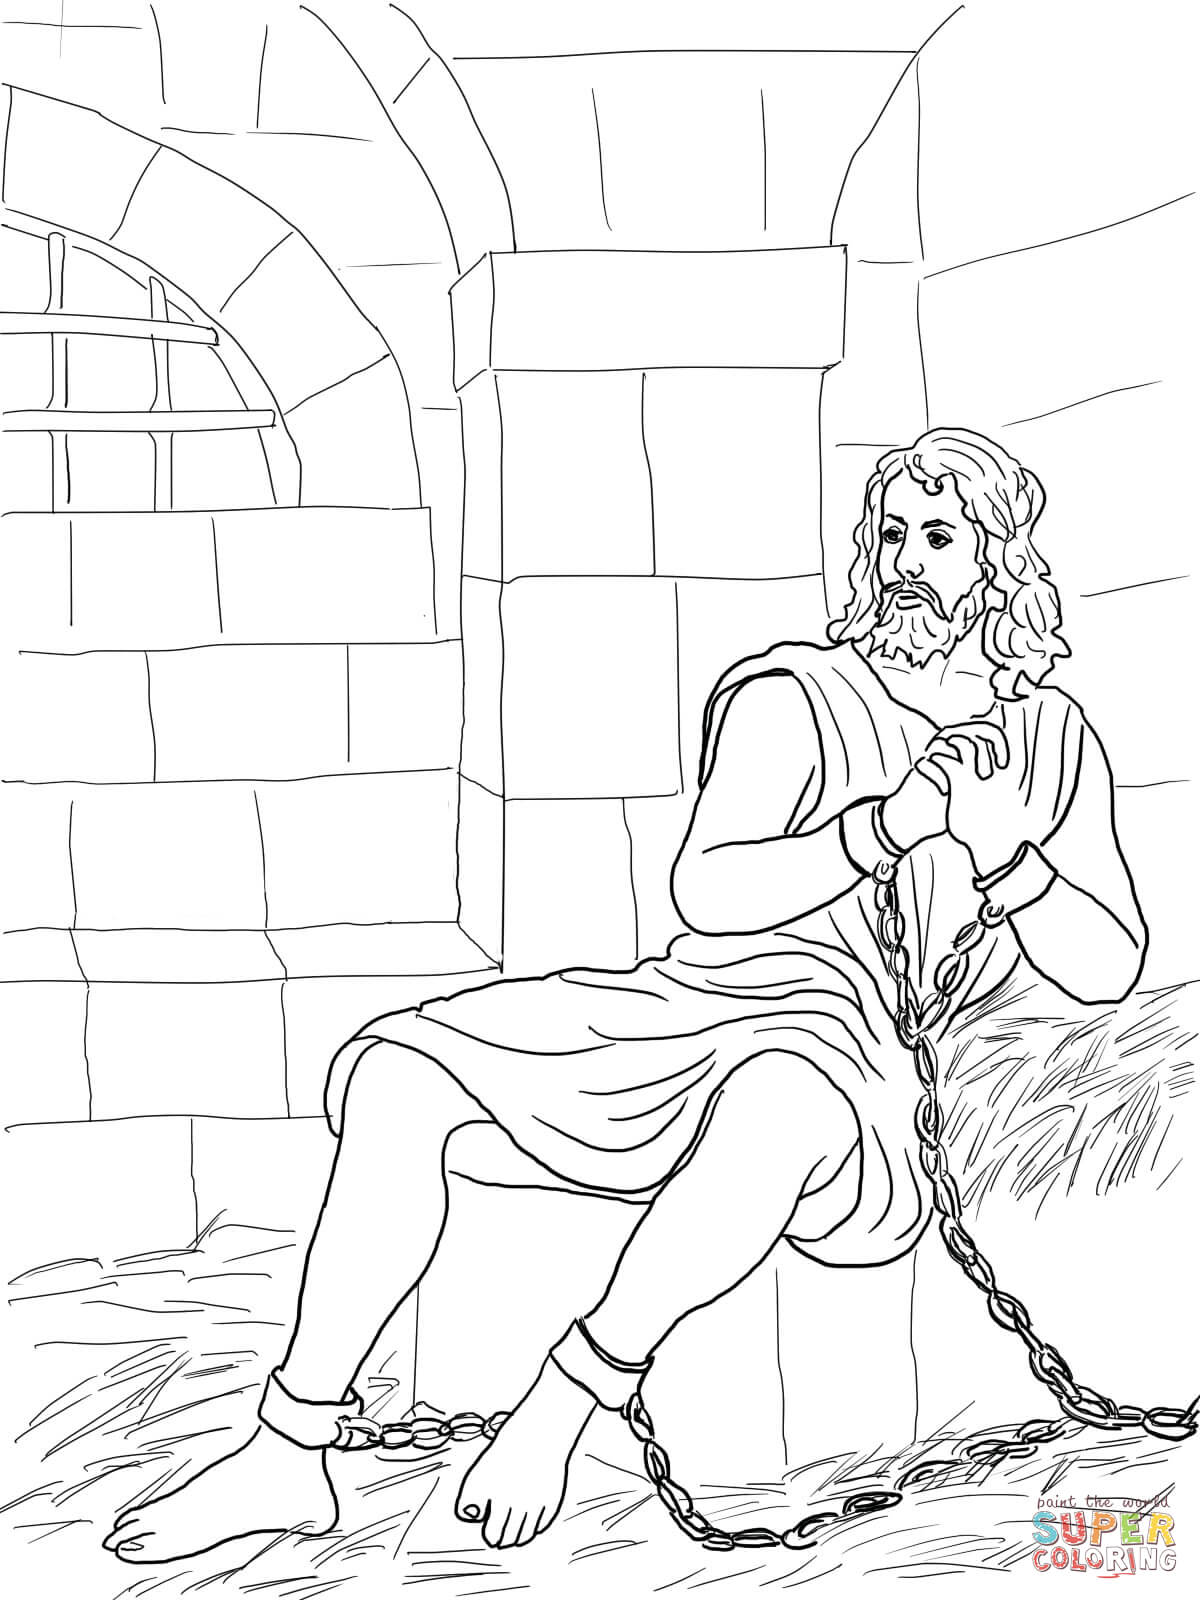 Peter In Prison Coloring Page Coloring Home